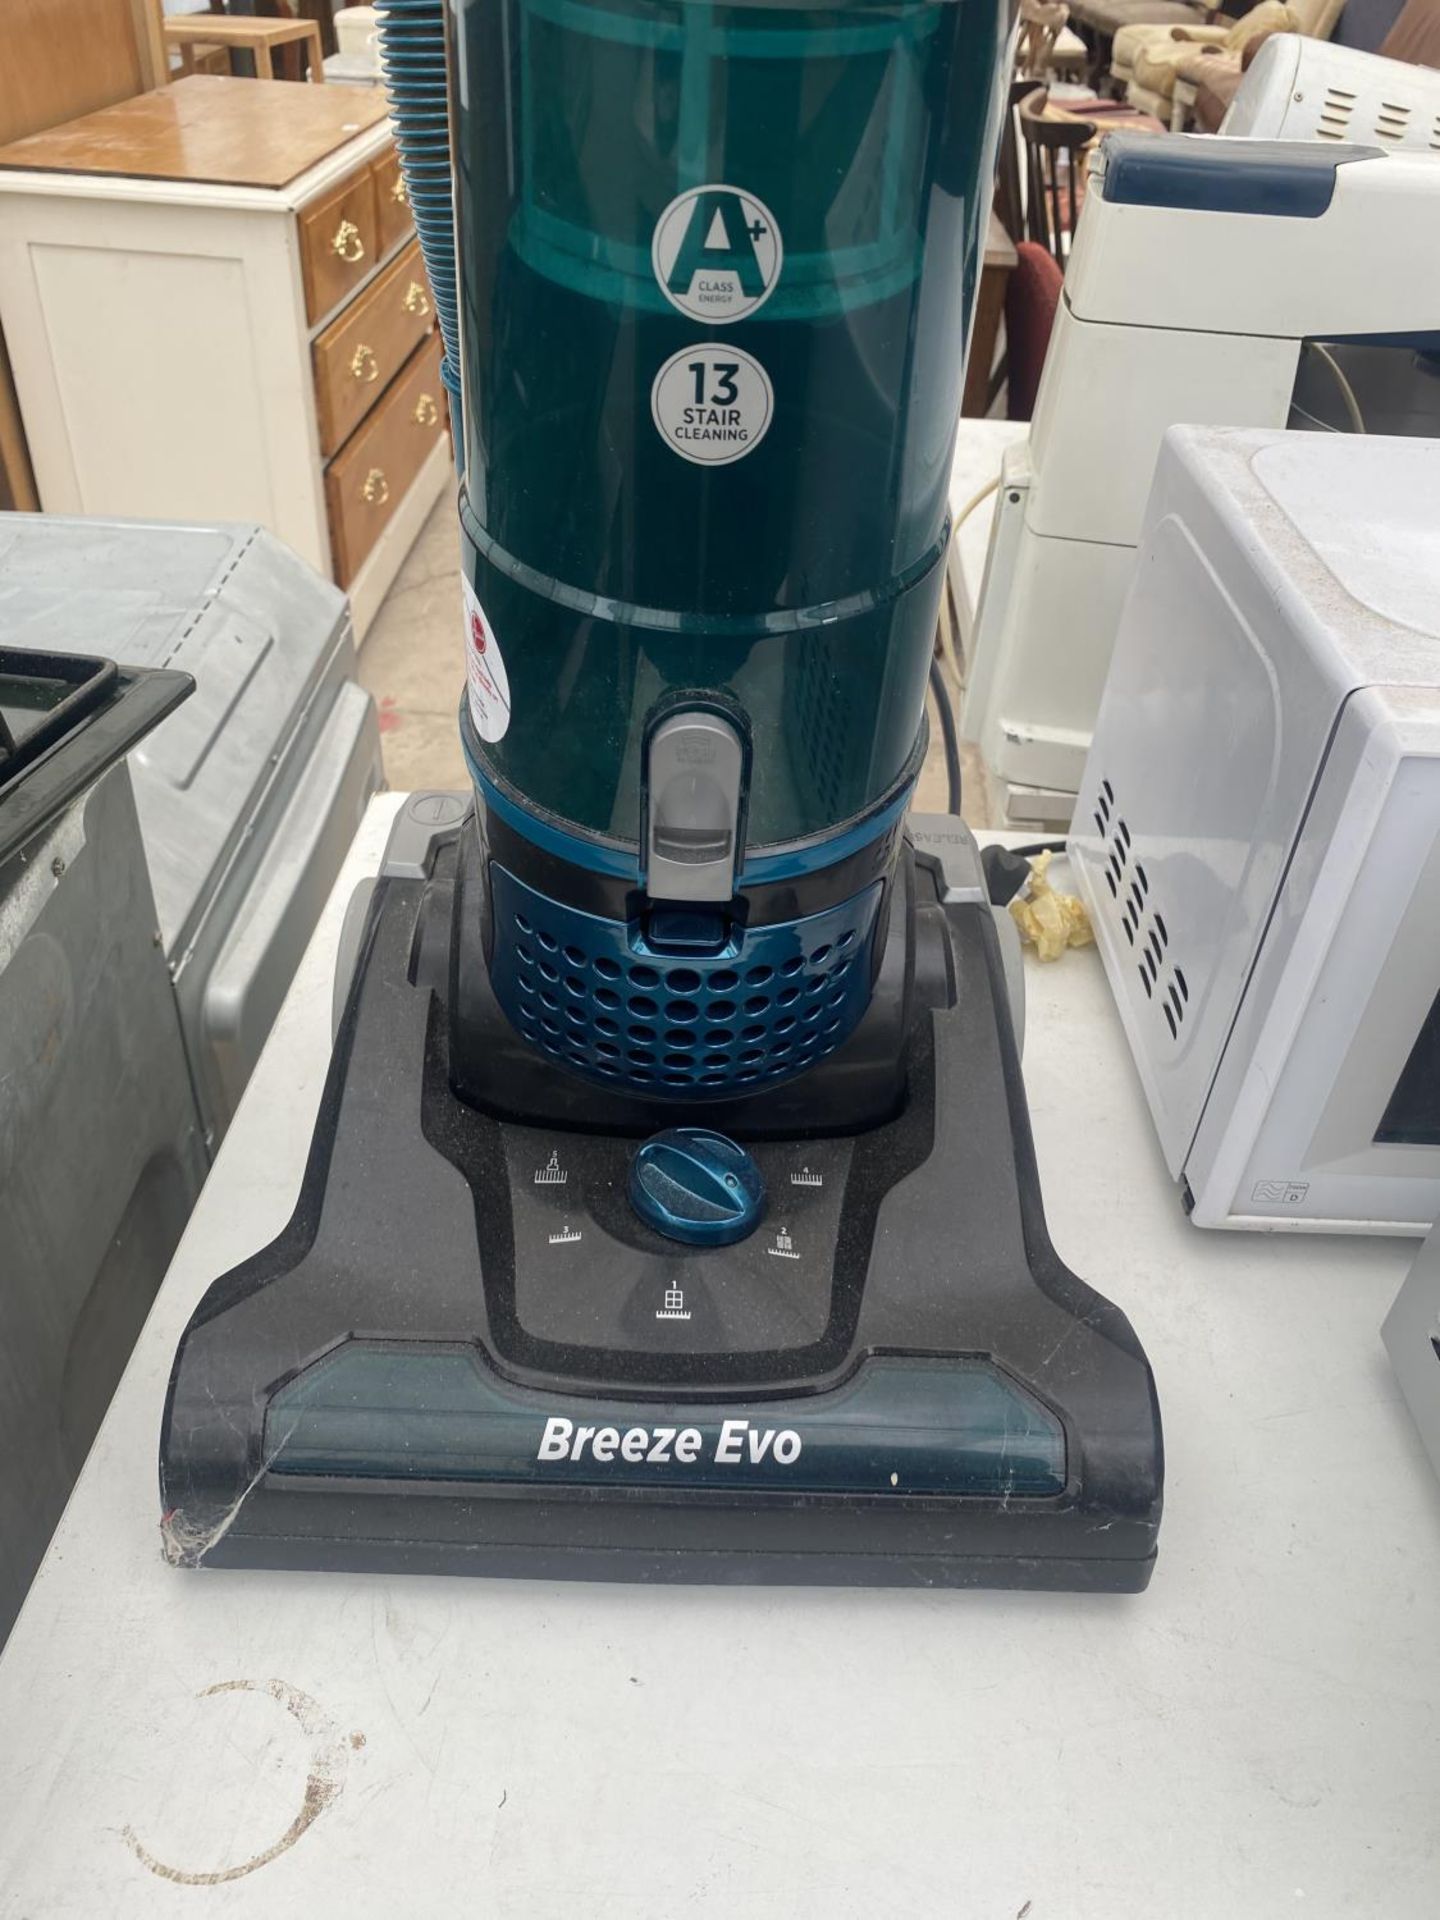 A HOOVER BREEZE EVO VACUUM CLEANER - Image 2 of 4